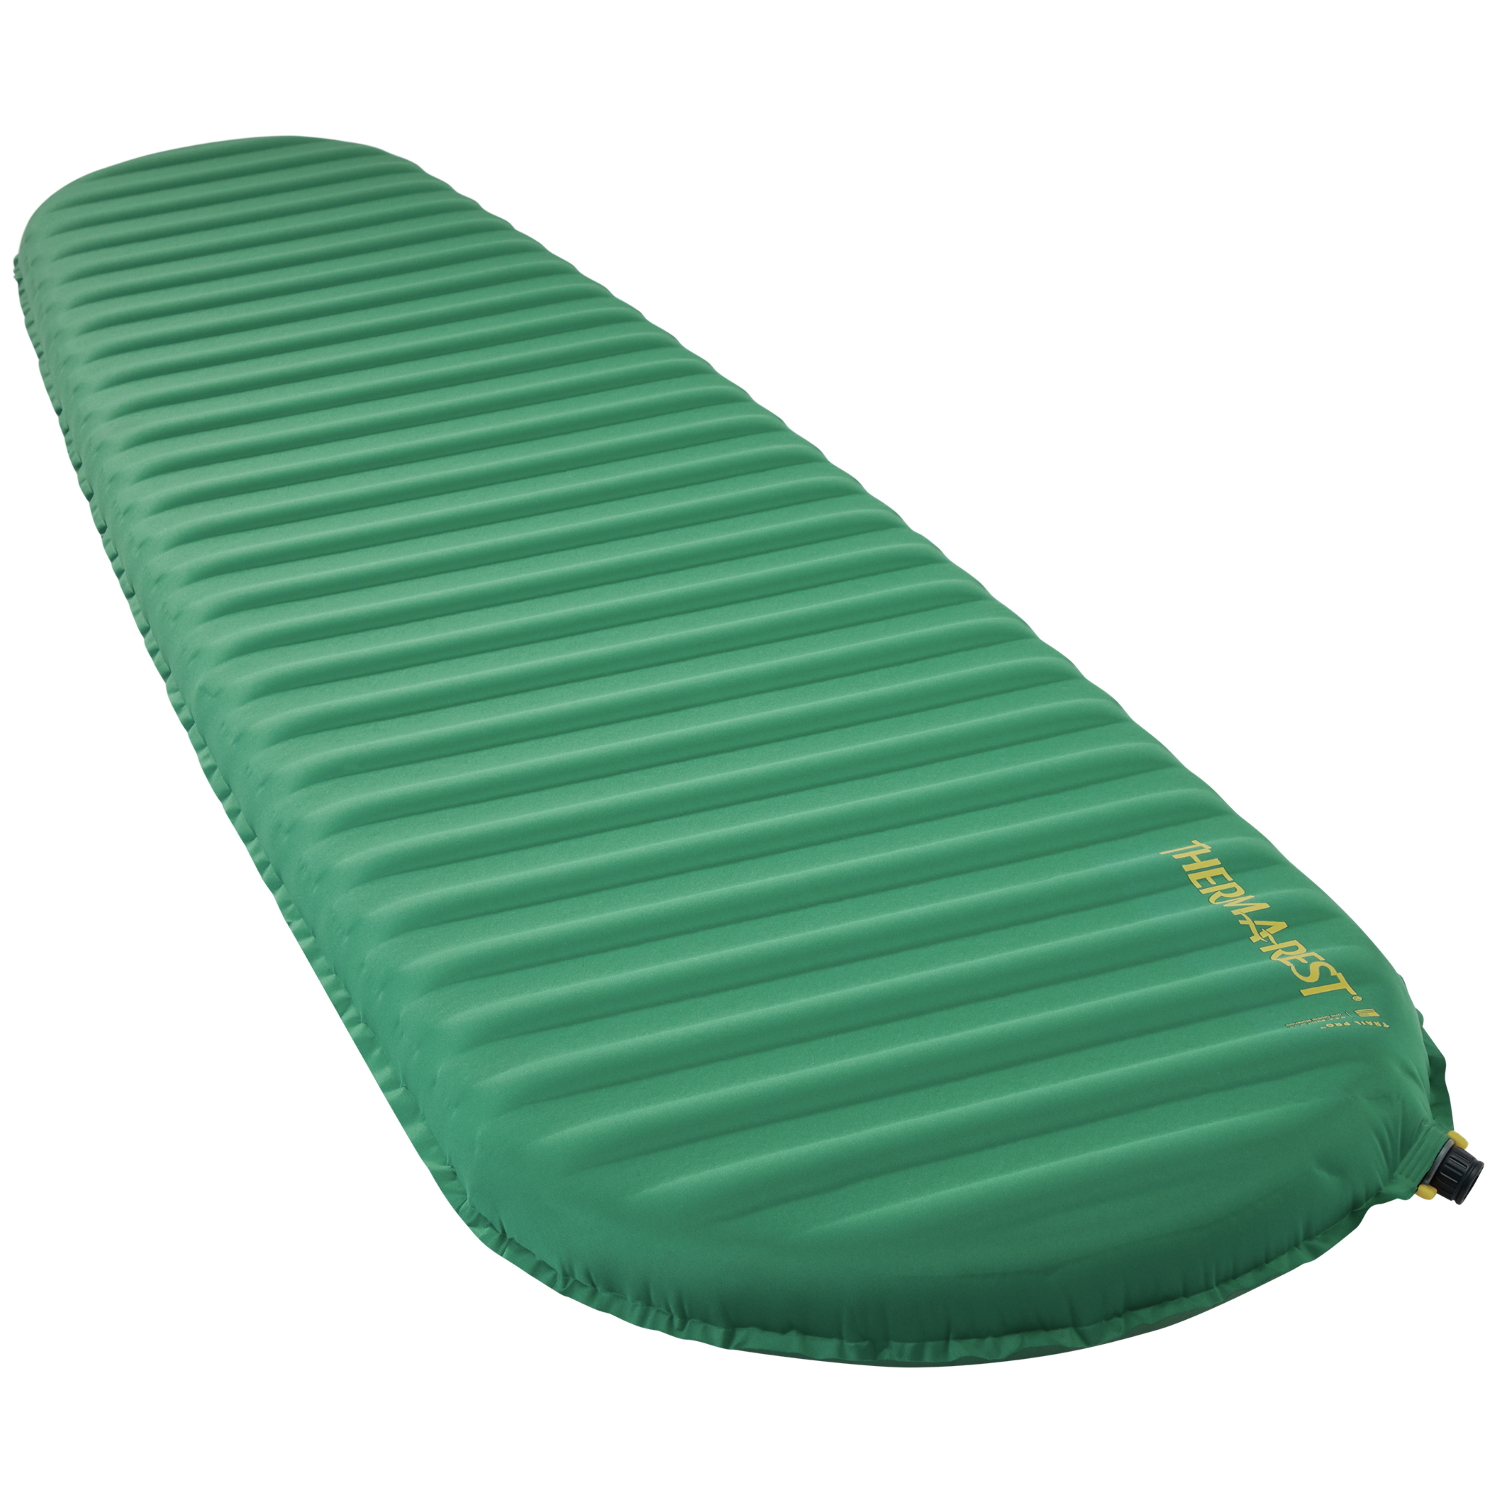 Picture of Therm-a-Rest Trail Pro Sleeping Pad - Regular Wide - pine